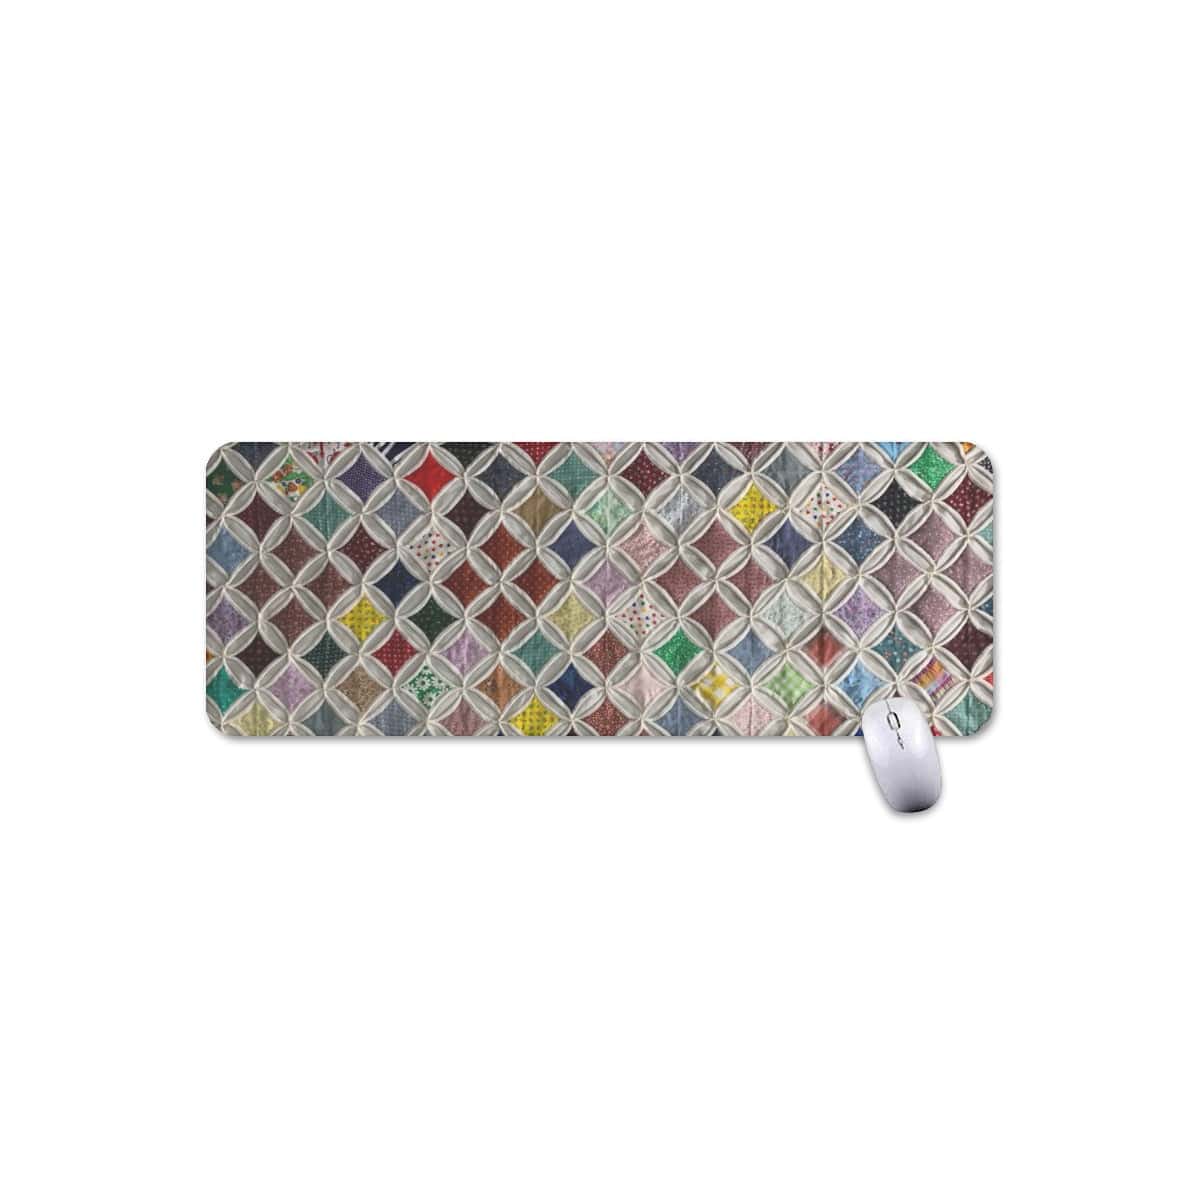 Yoycol XL / White Quilted Look - Mouse Pad Plus Size